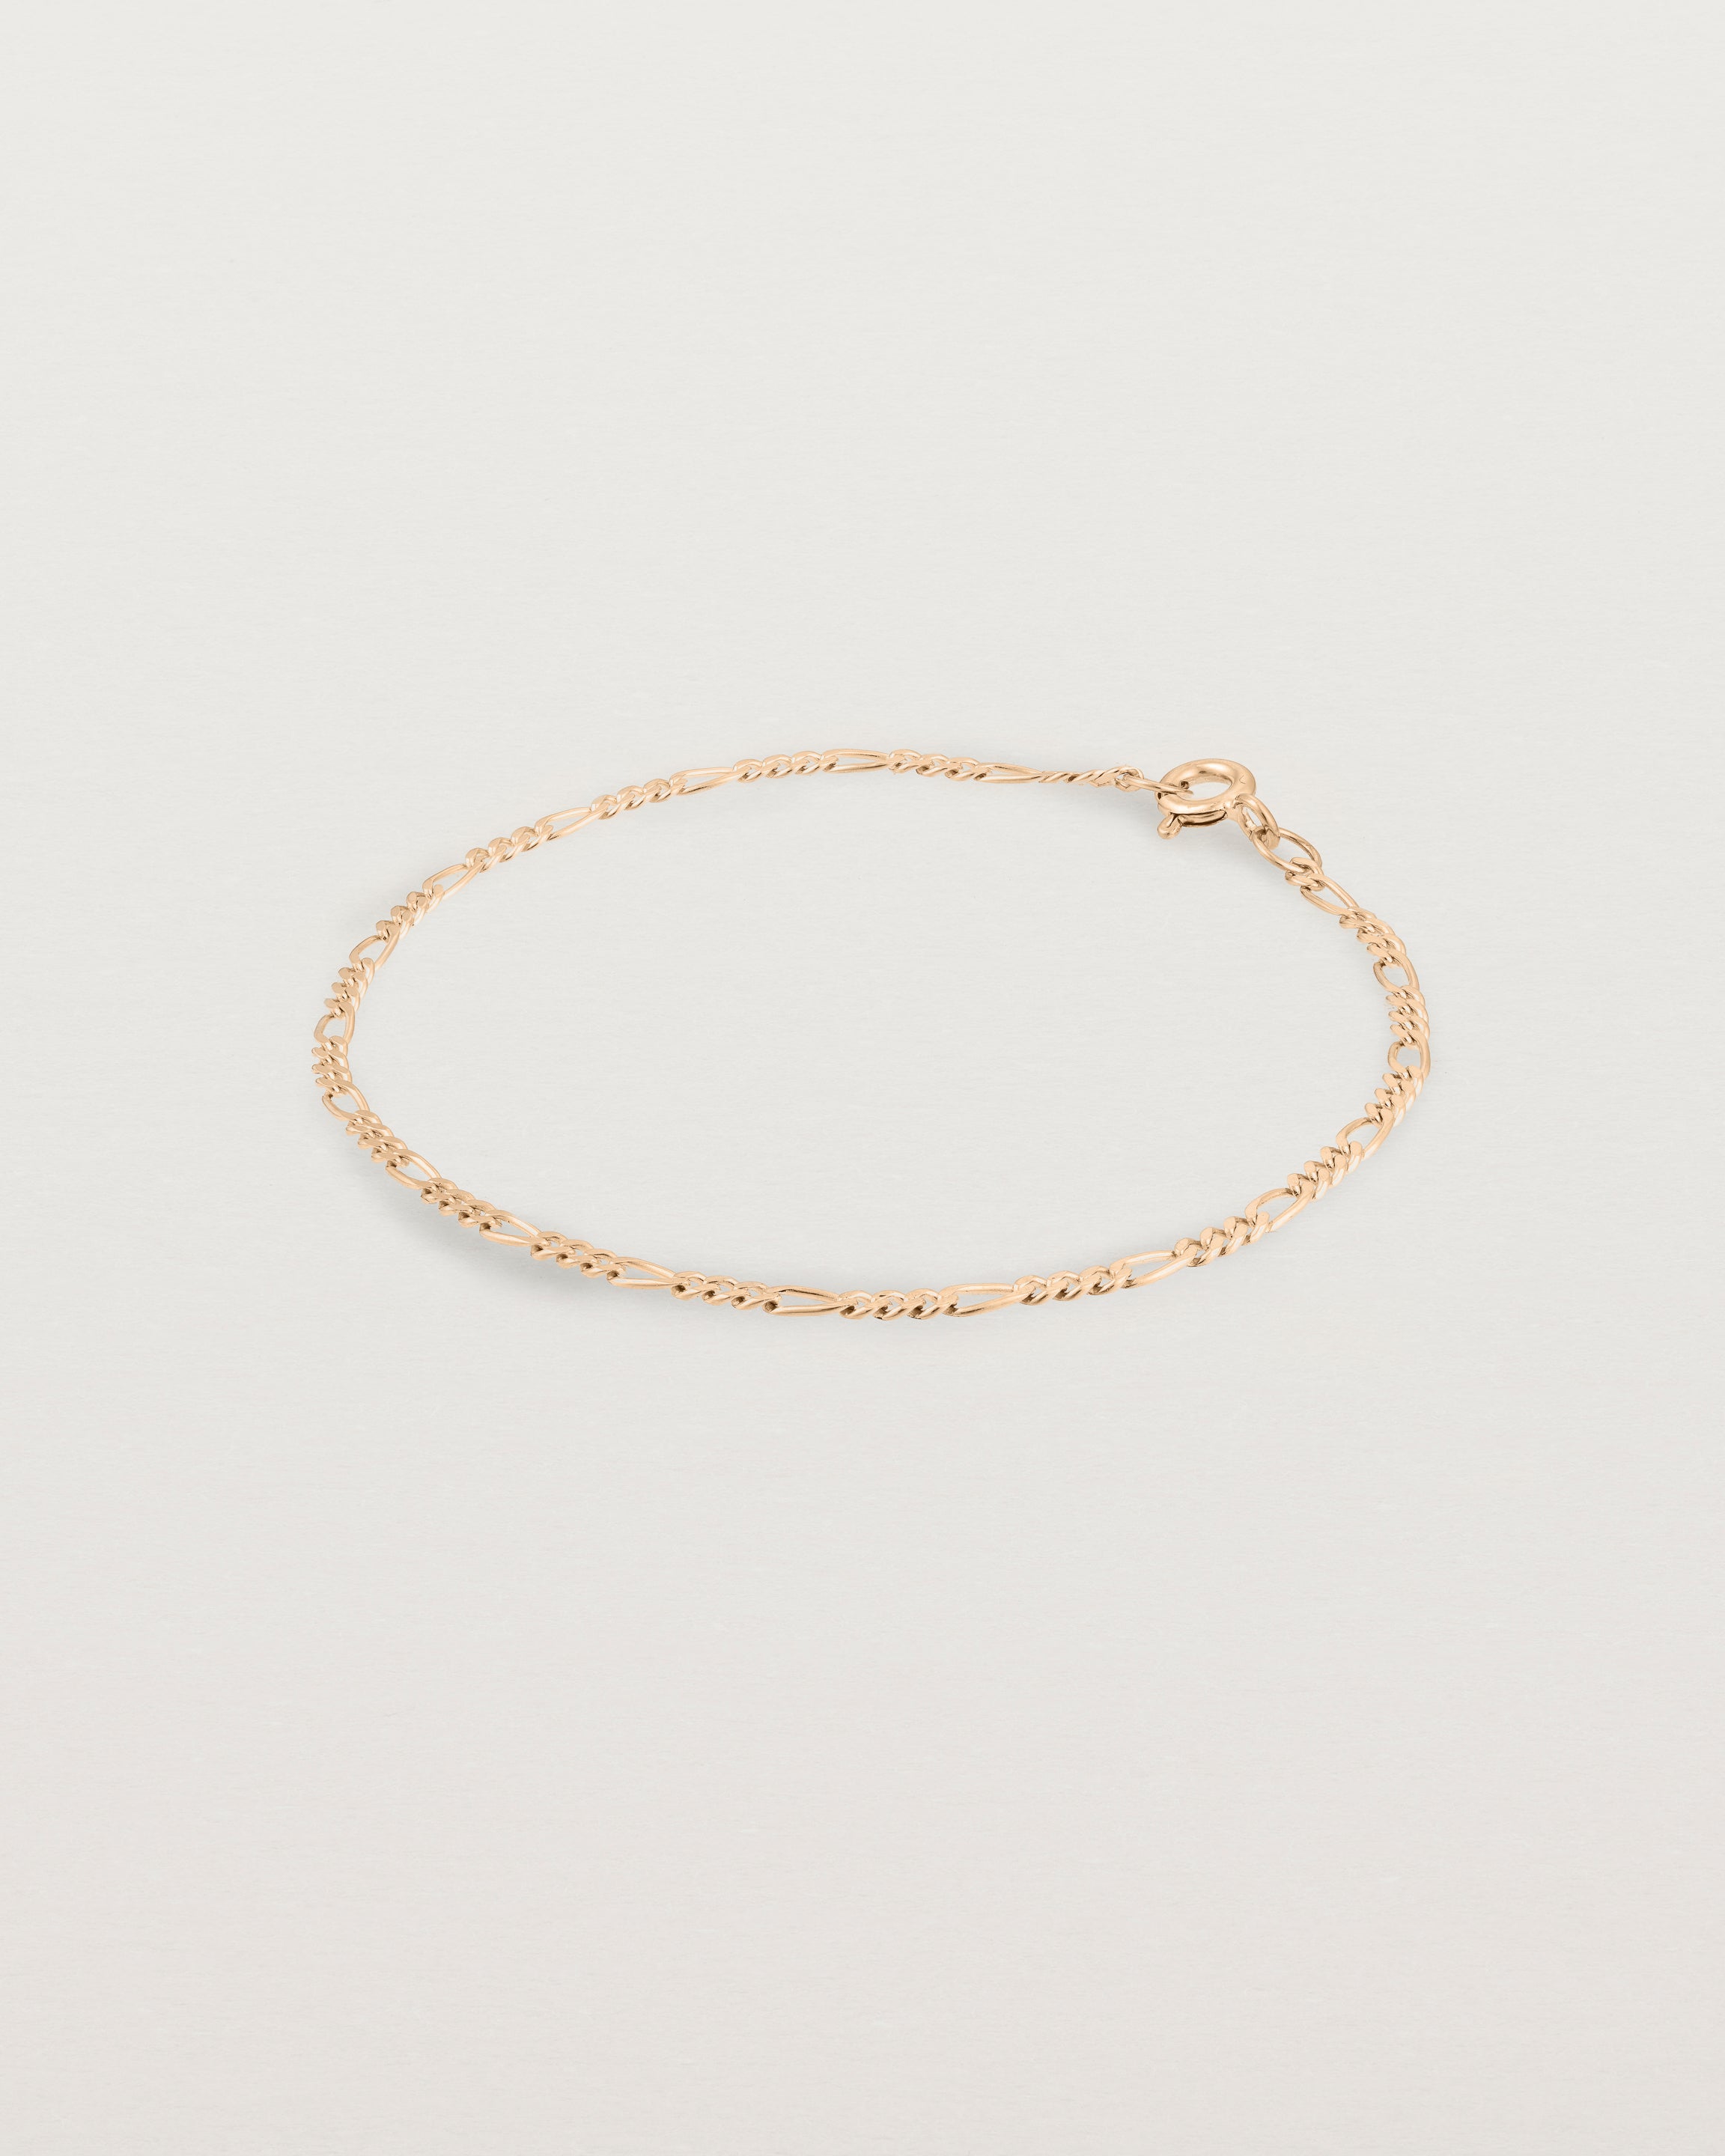 Our signature figaro chain in rose gold